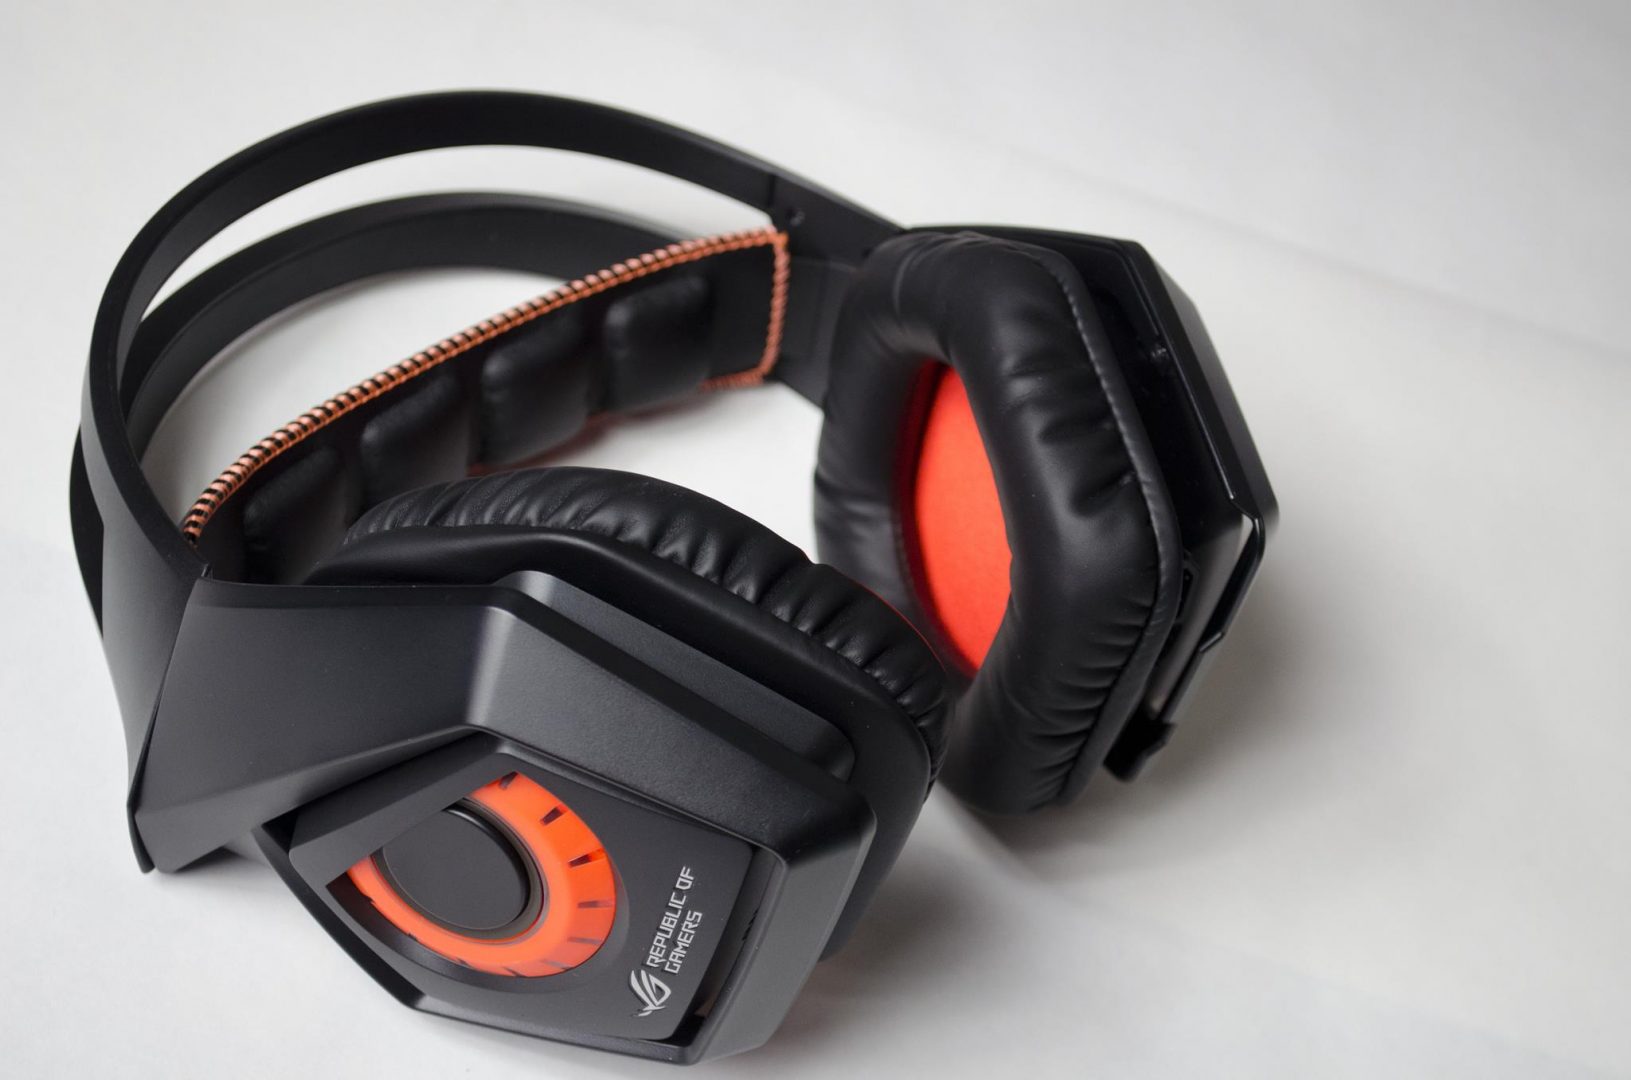 ASUS ROG Strix Wireless Headset Review